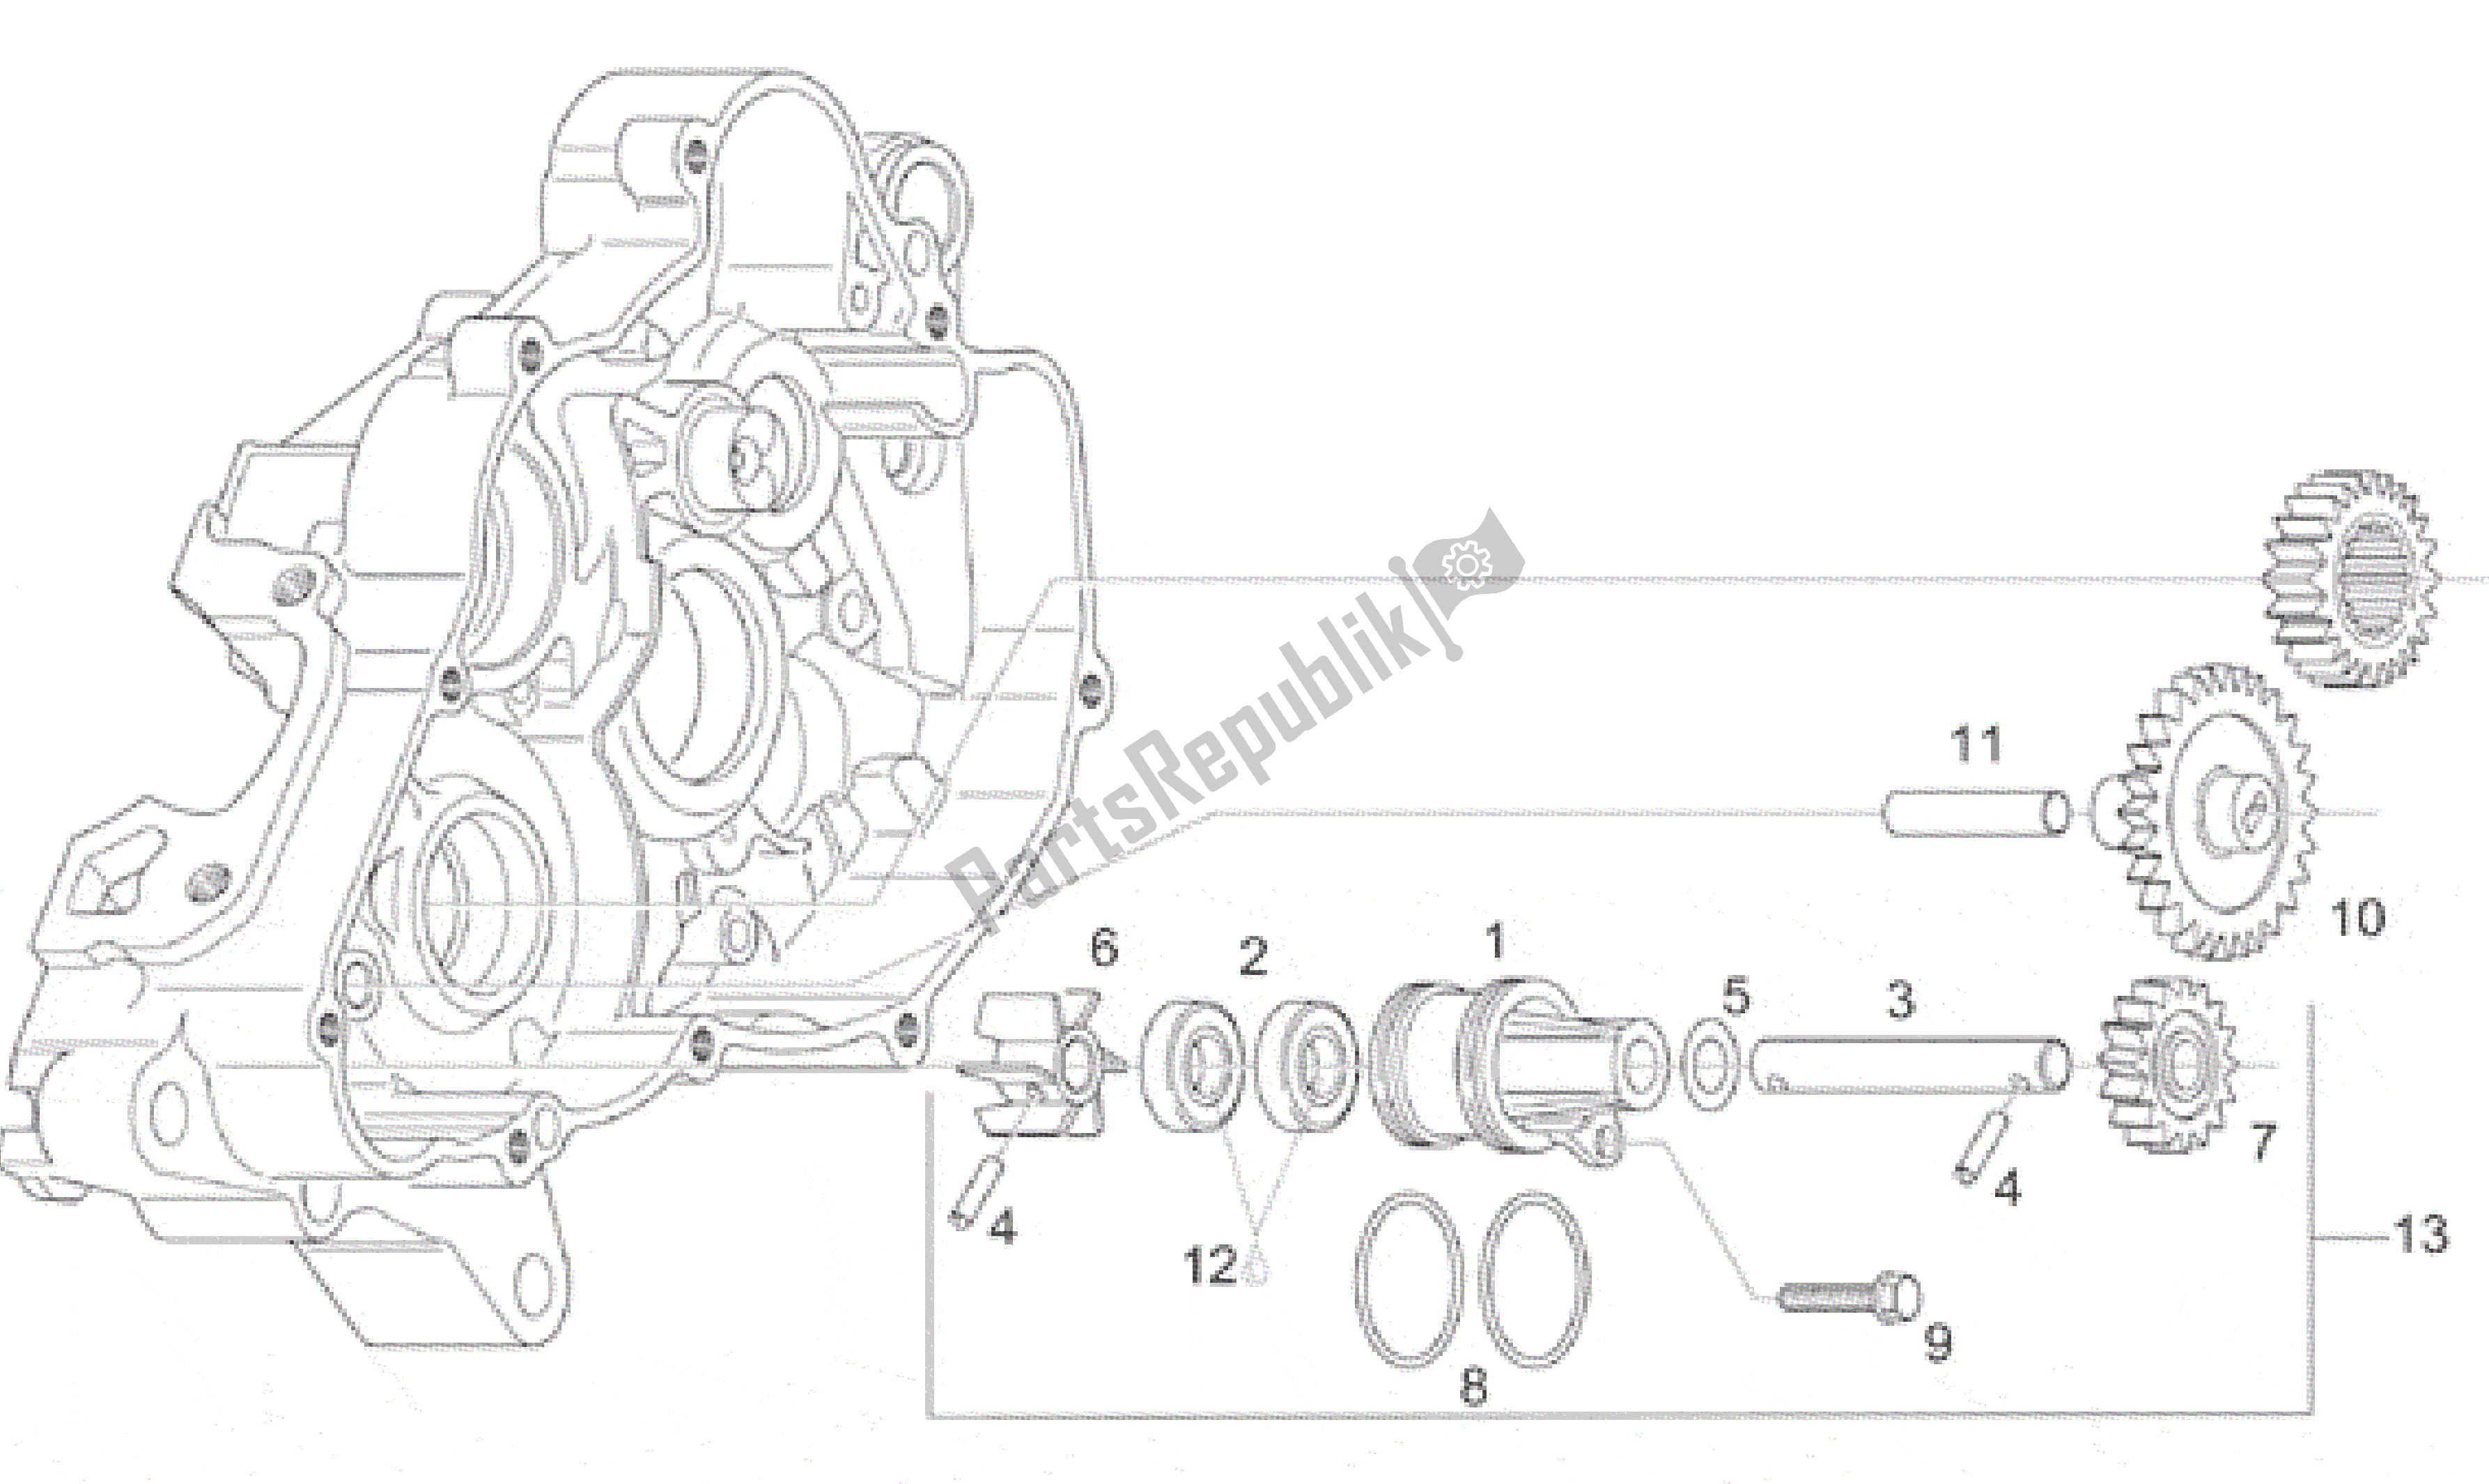 All parts for the Water Pump Assy of the Aprilia RS 125 1999 - 2001